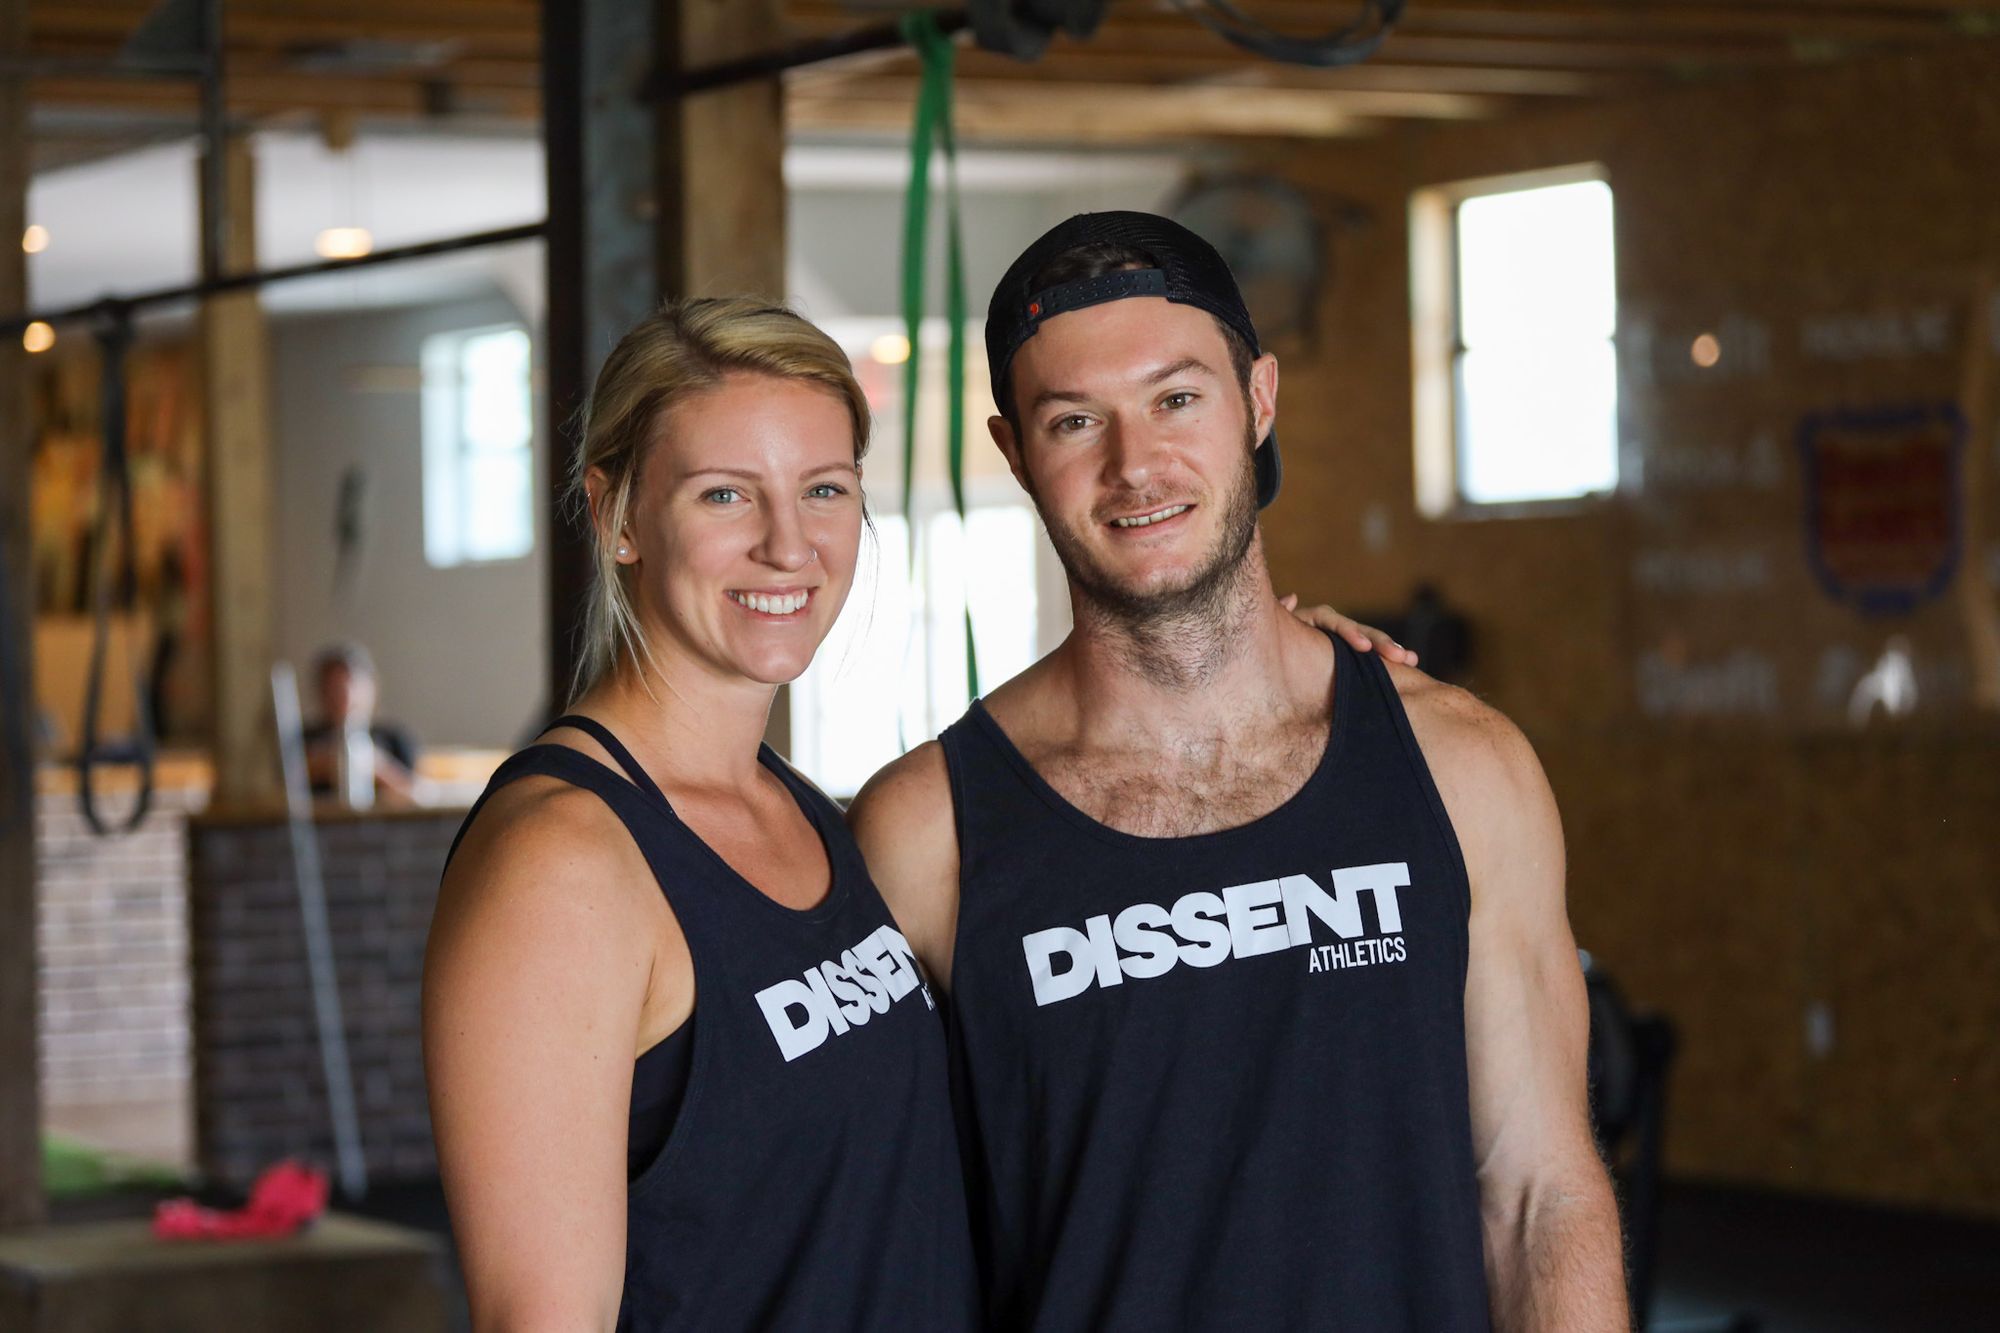 Work Out. Get Fit. Be Happy. - Dissent Athletics